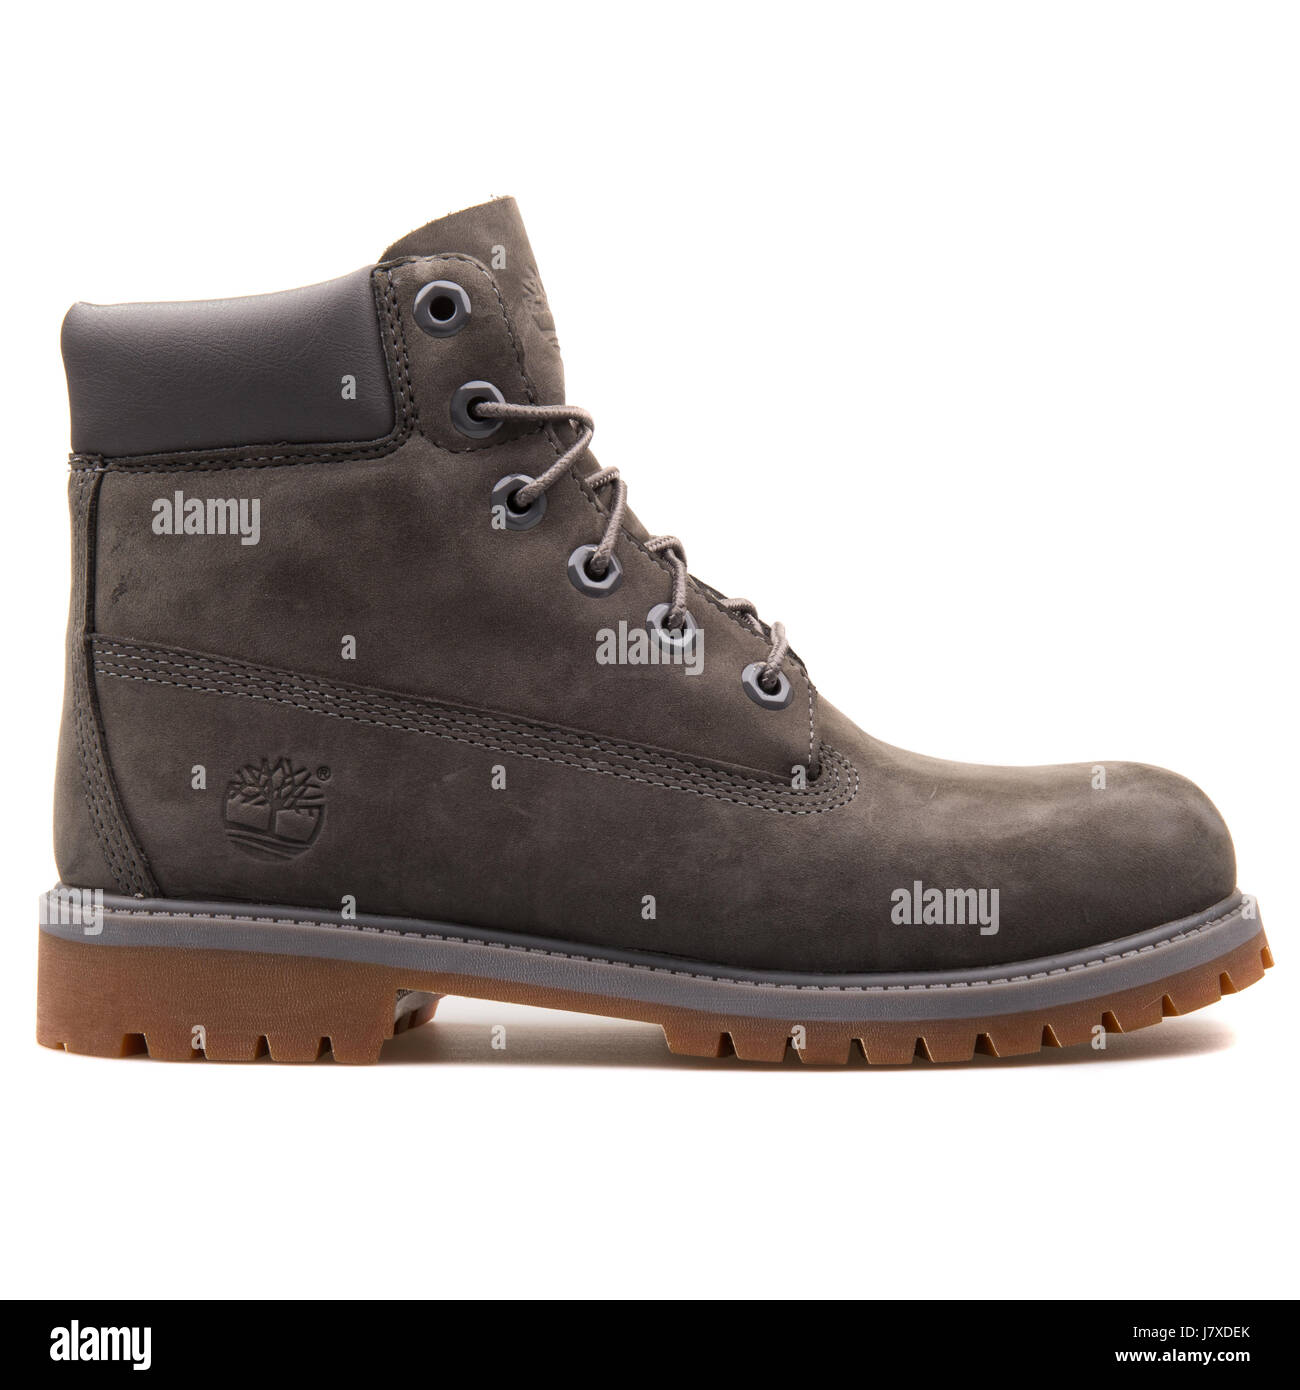 Timberland 6 inch Premium Waterproof Junior's Grey Leather Boots - A14ZZ  Stock Photo - Alamy